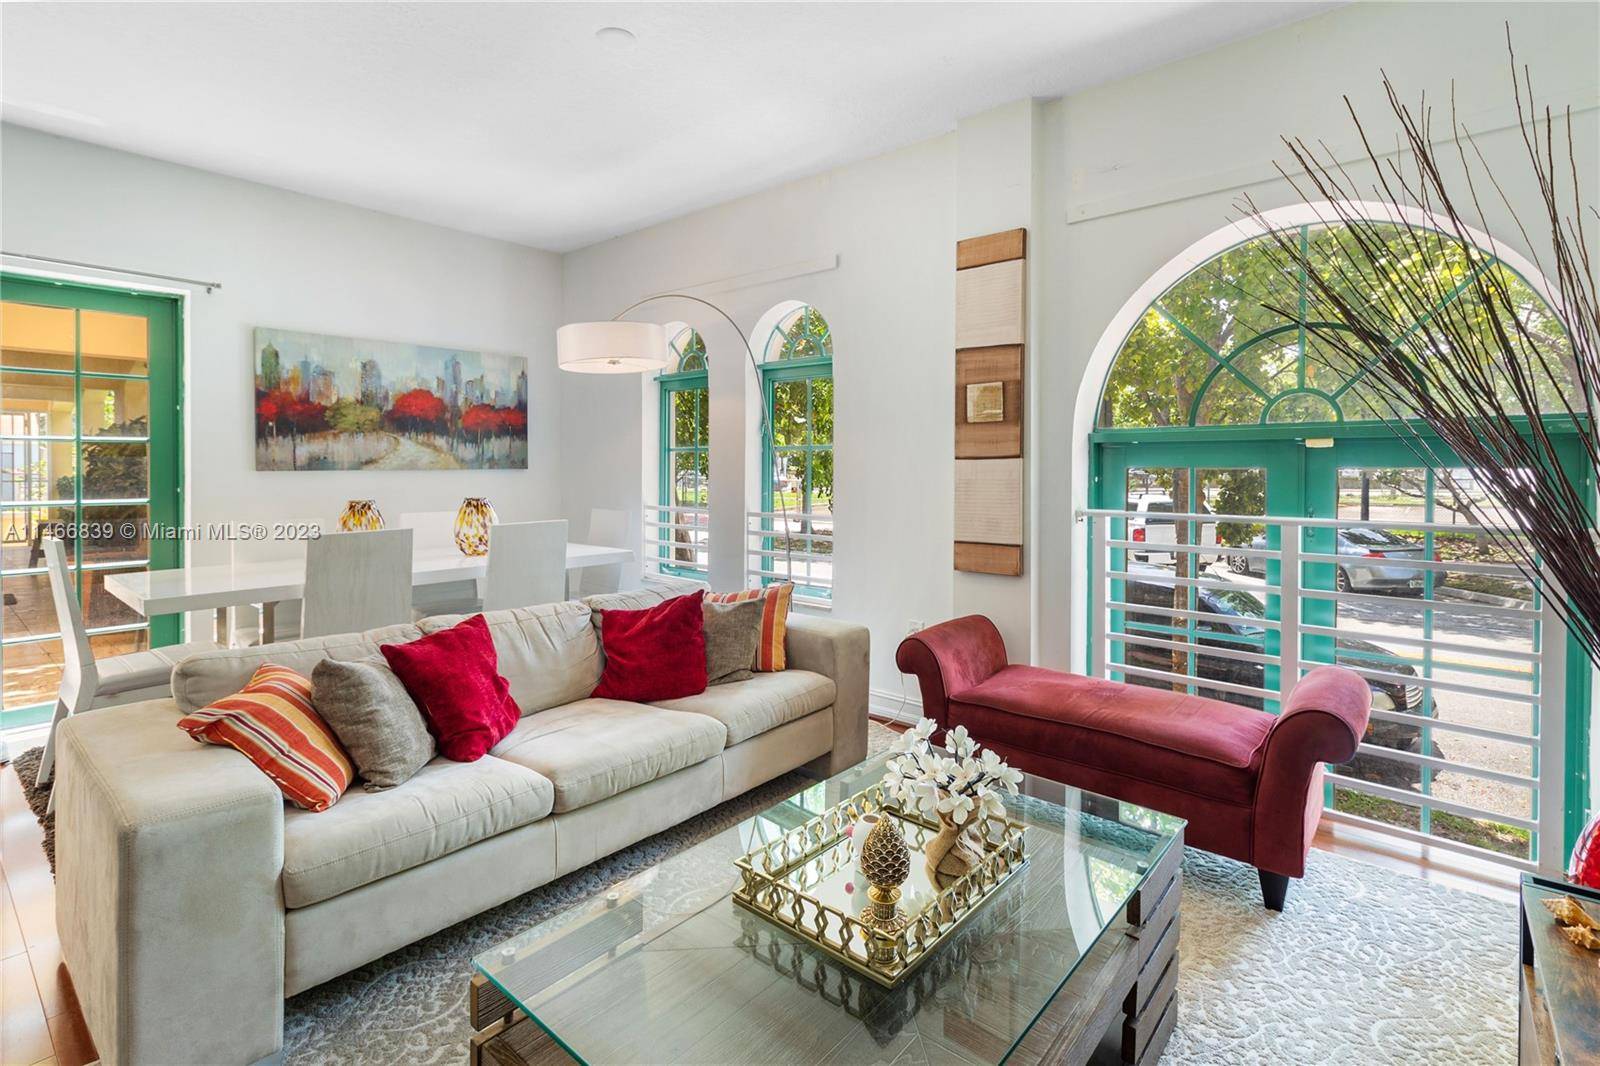 Desirable boutique building in the heart of the South of Fifth neighborhood in South Beach.